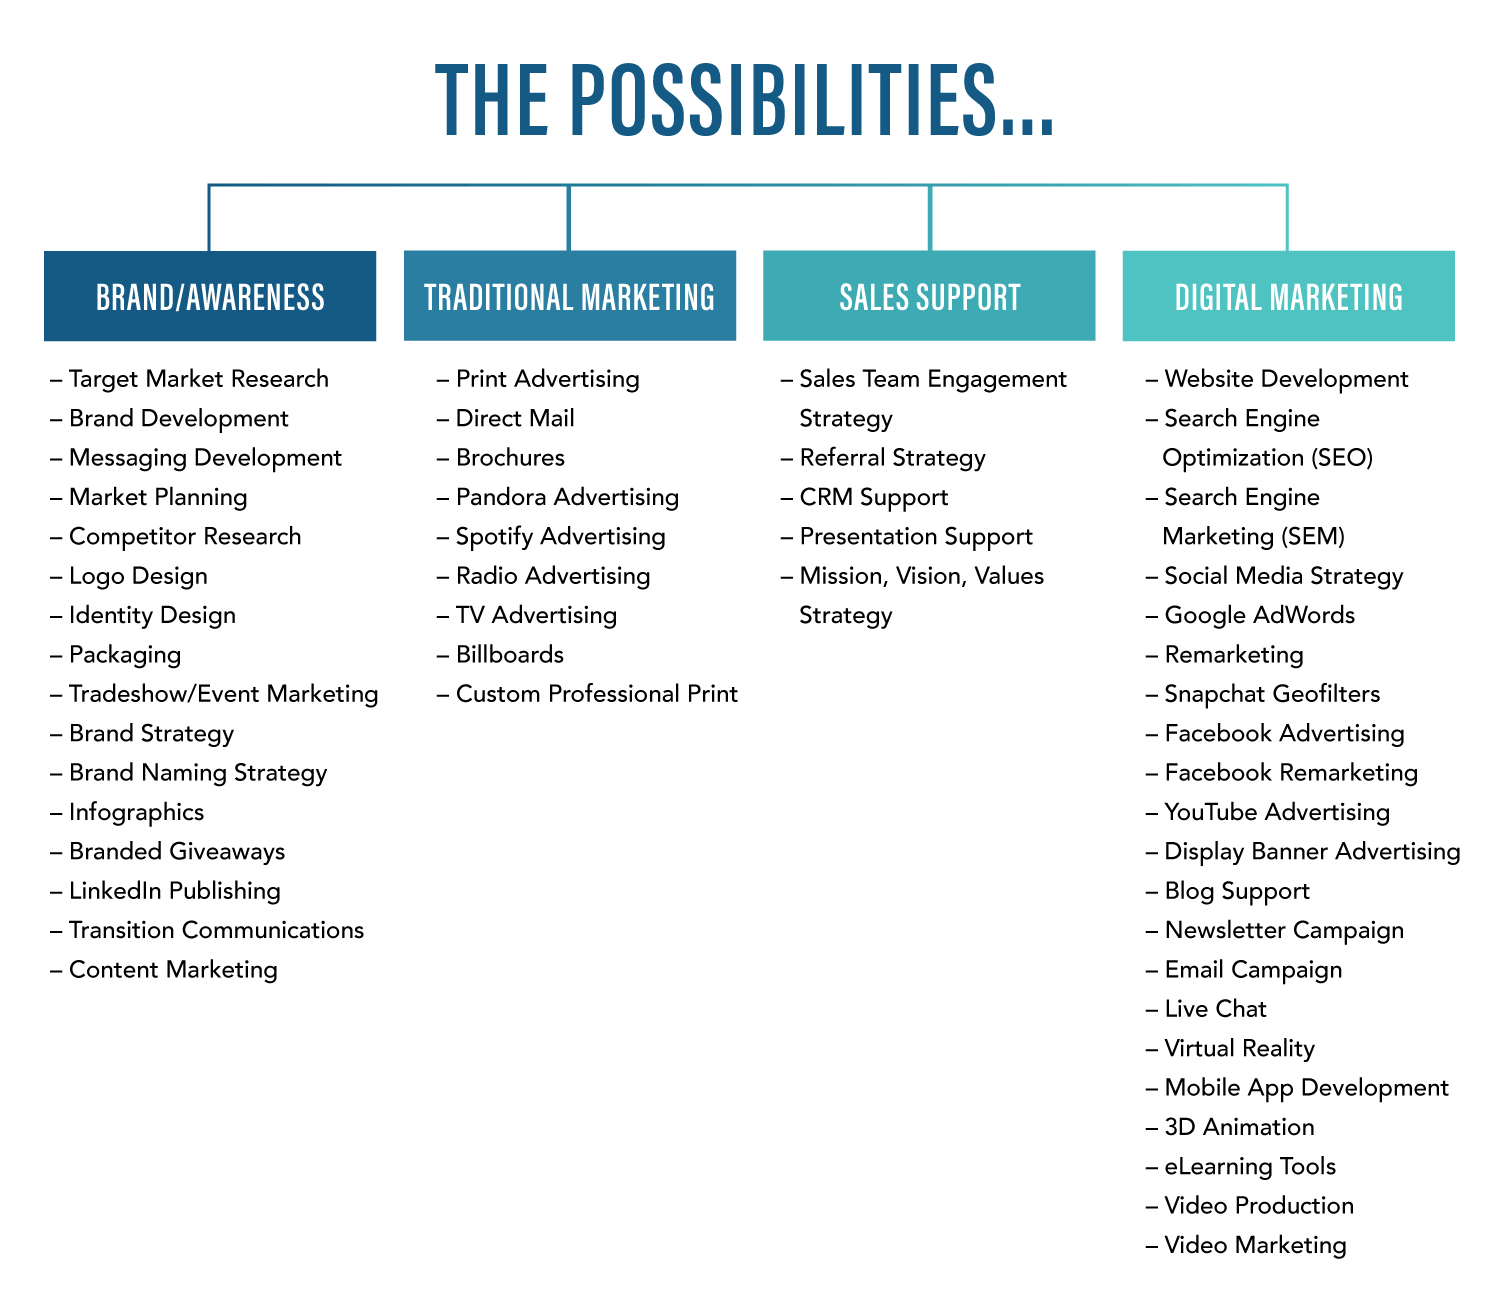 Graphic of all the marketing possibilities at Big Buzz